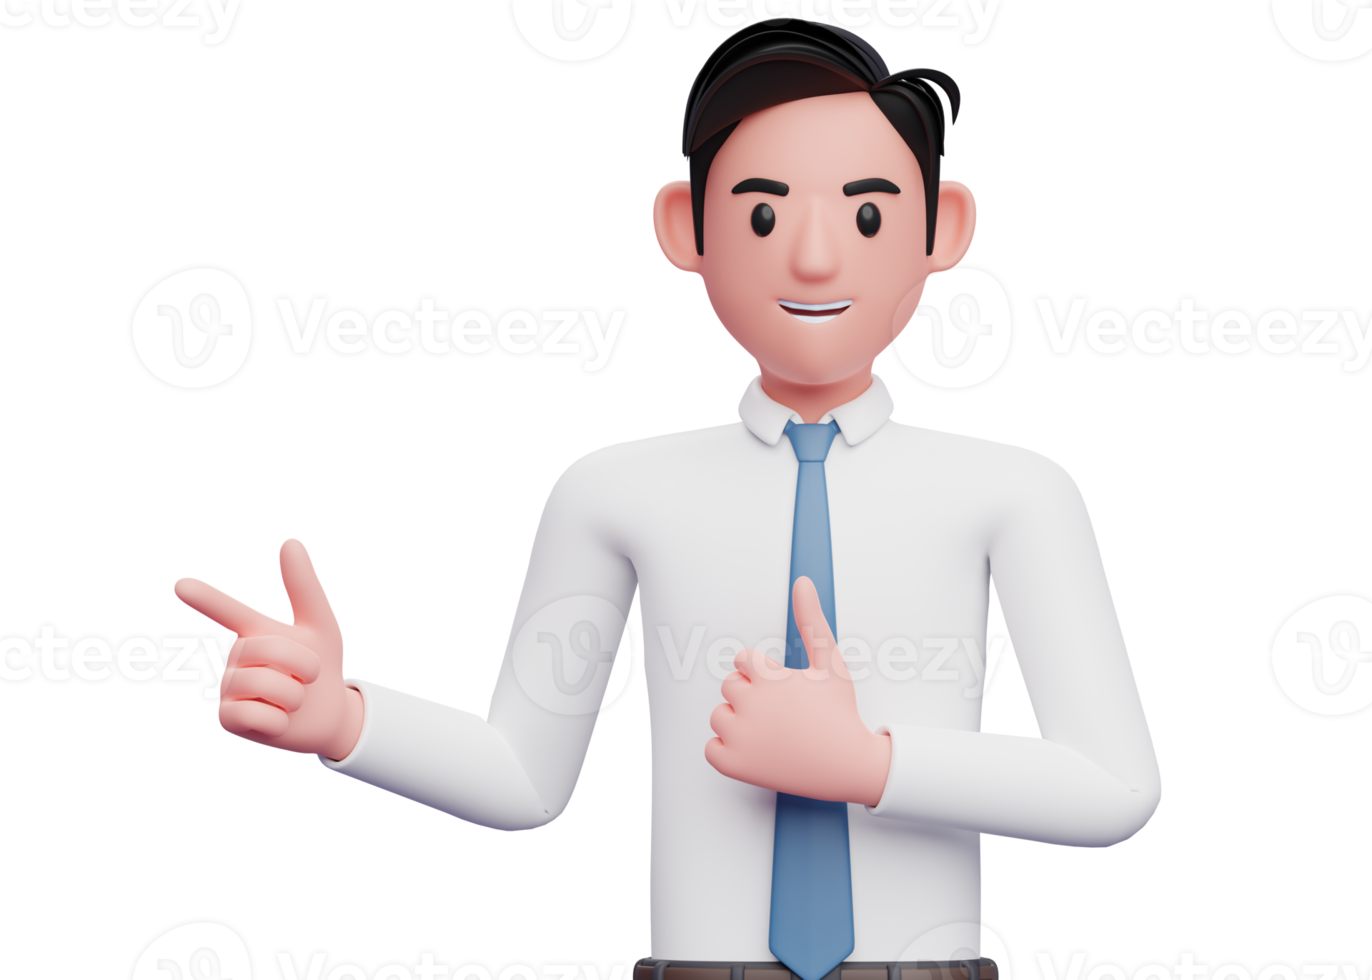 Businessman in white shirt and blue tie pointing and thumbs up, close up 3D illustration of businessman in white shirt pointing and thumbs up png